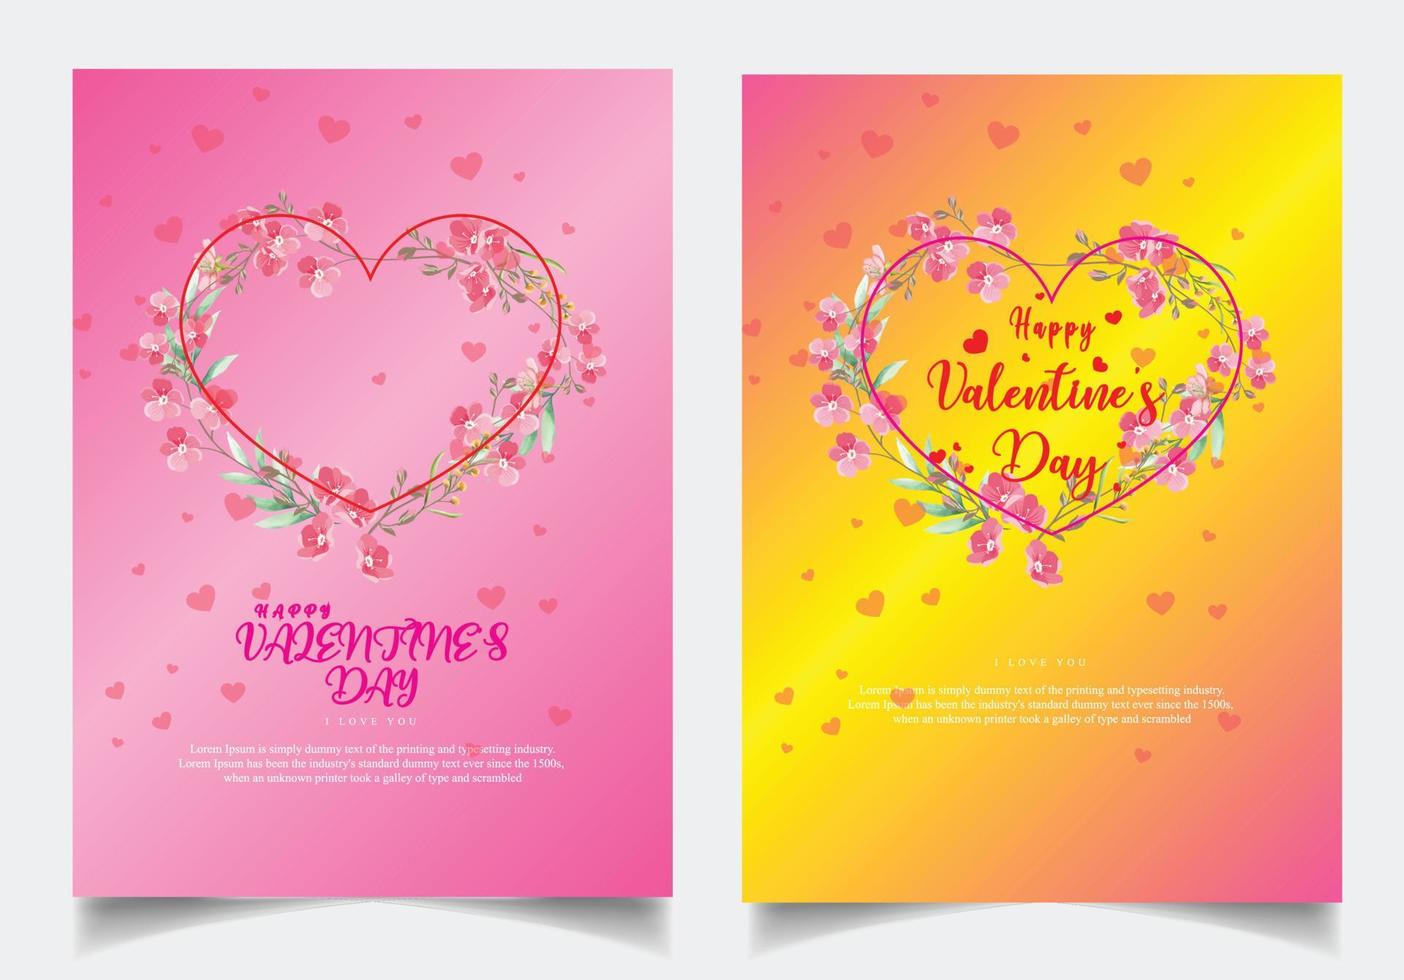 Happy Valentine's Day party poster and flyer.  Invitation card. vector